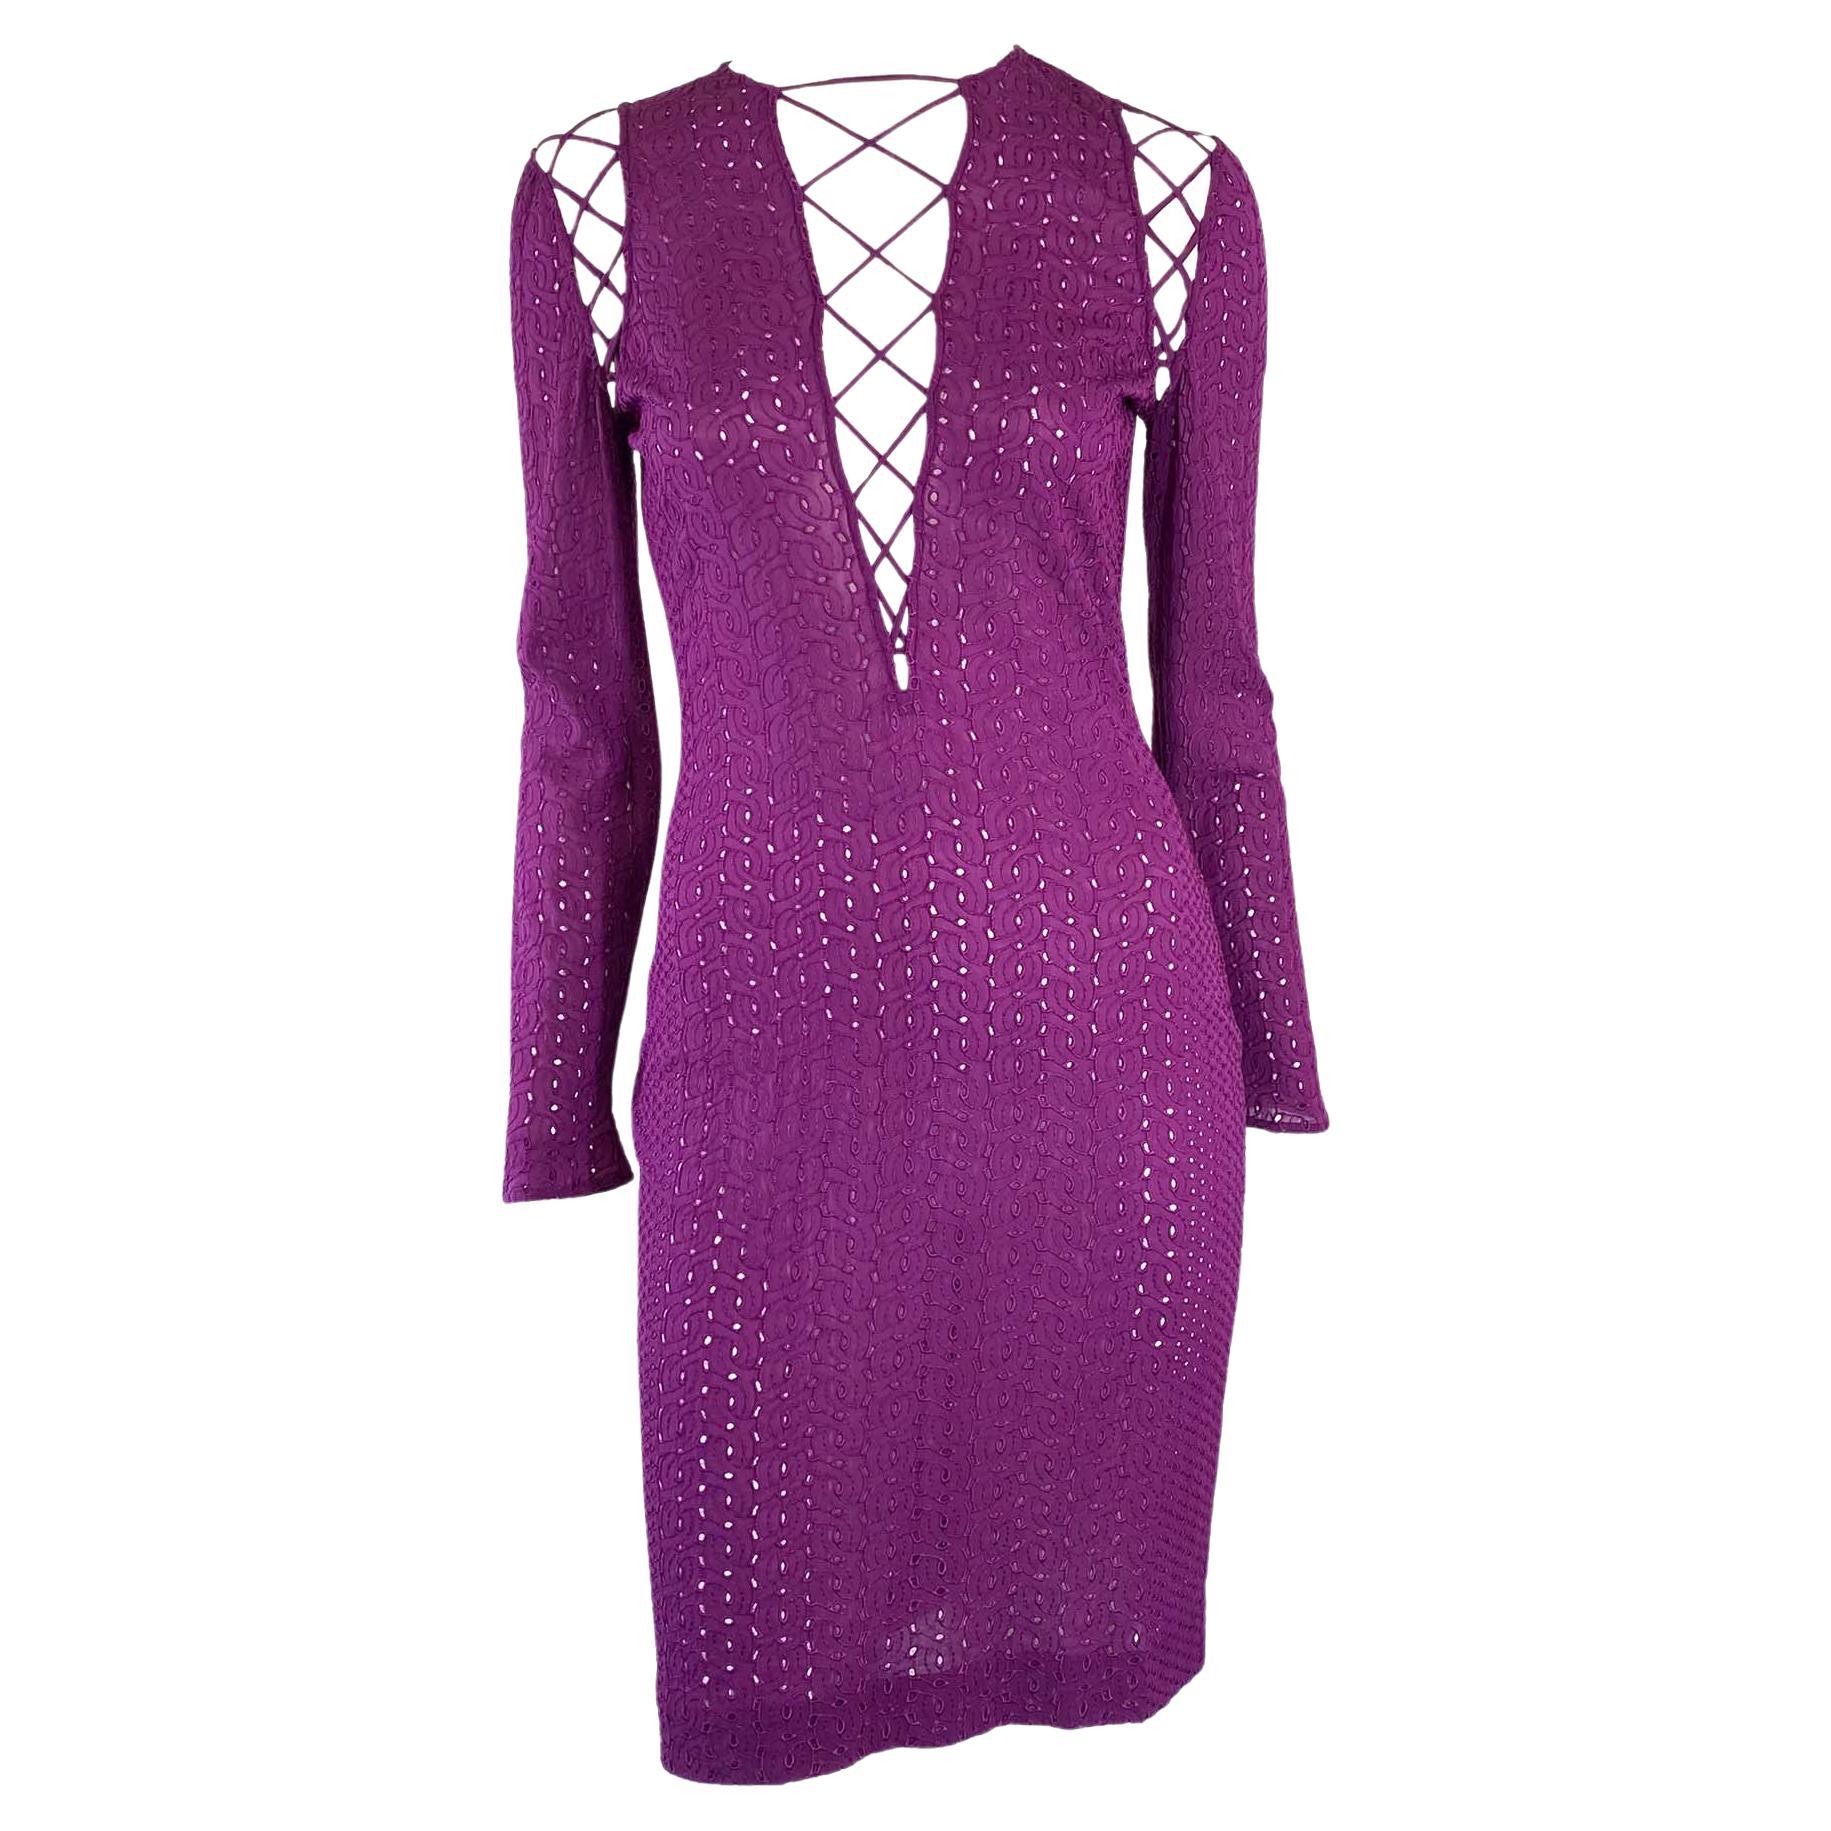 S/S 2002 Gianni Versace by Donatella Purple Lace-Up Eyelet Dress For Sale